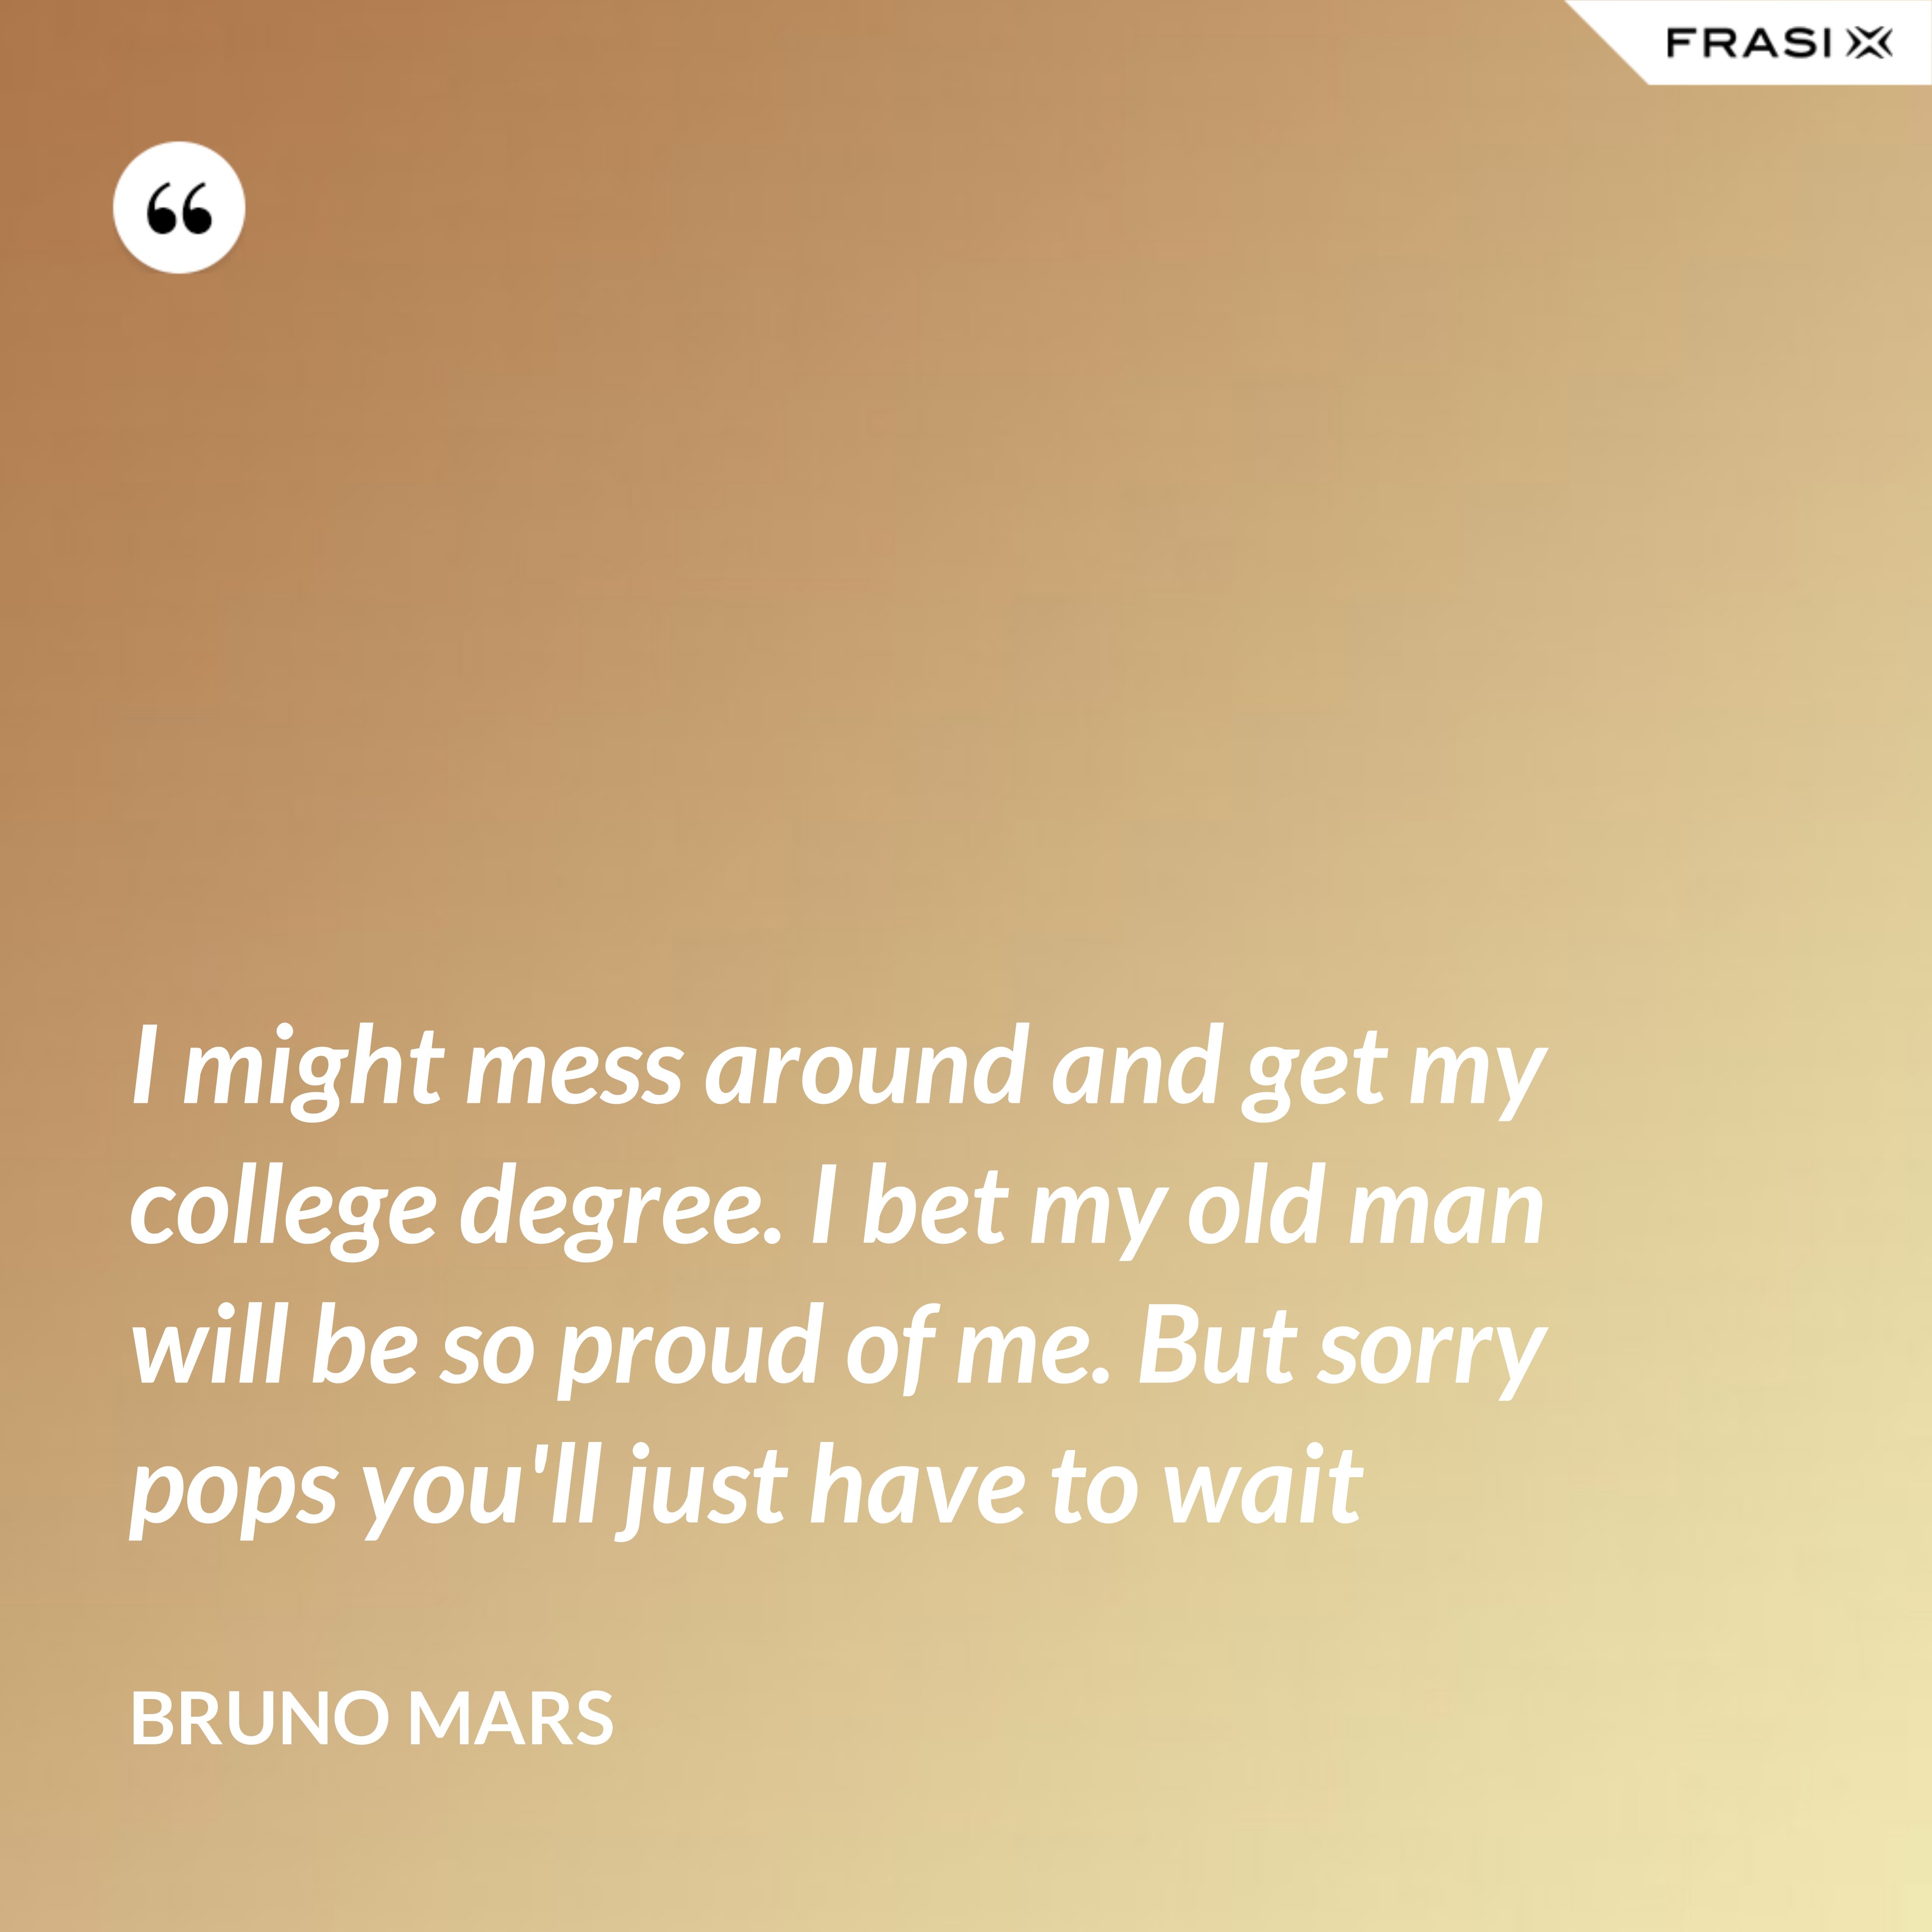 I might mess around and get my college degree. I bet my old man will be so proud of me. But sorry pops you'll just have to wait - Bruno Mars